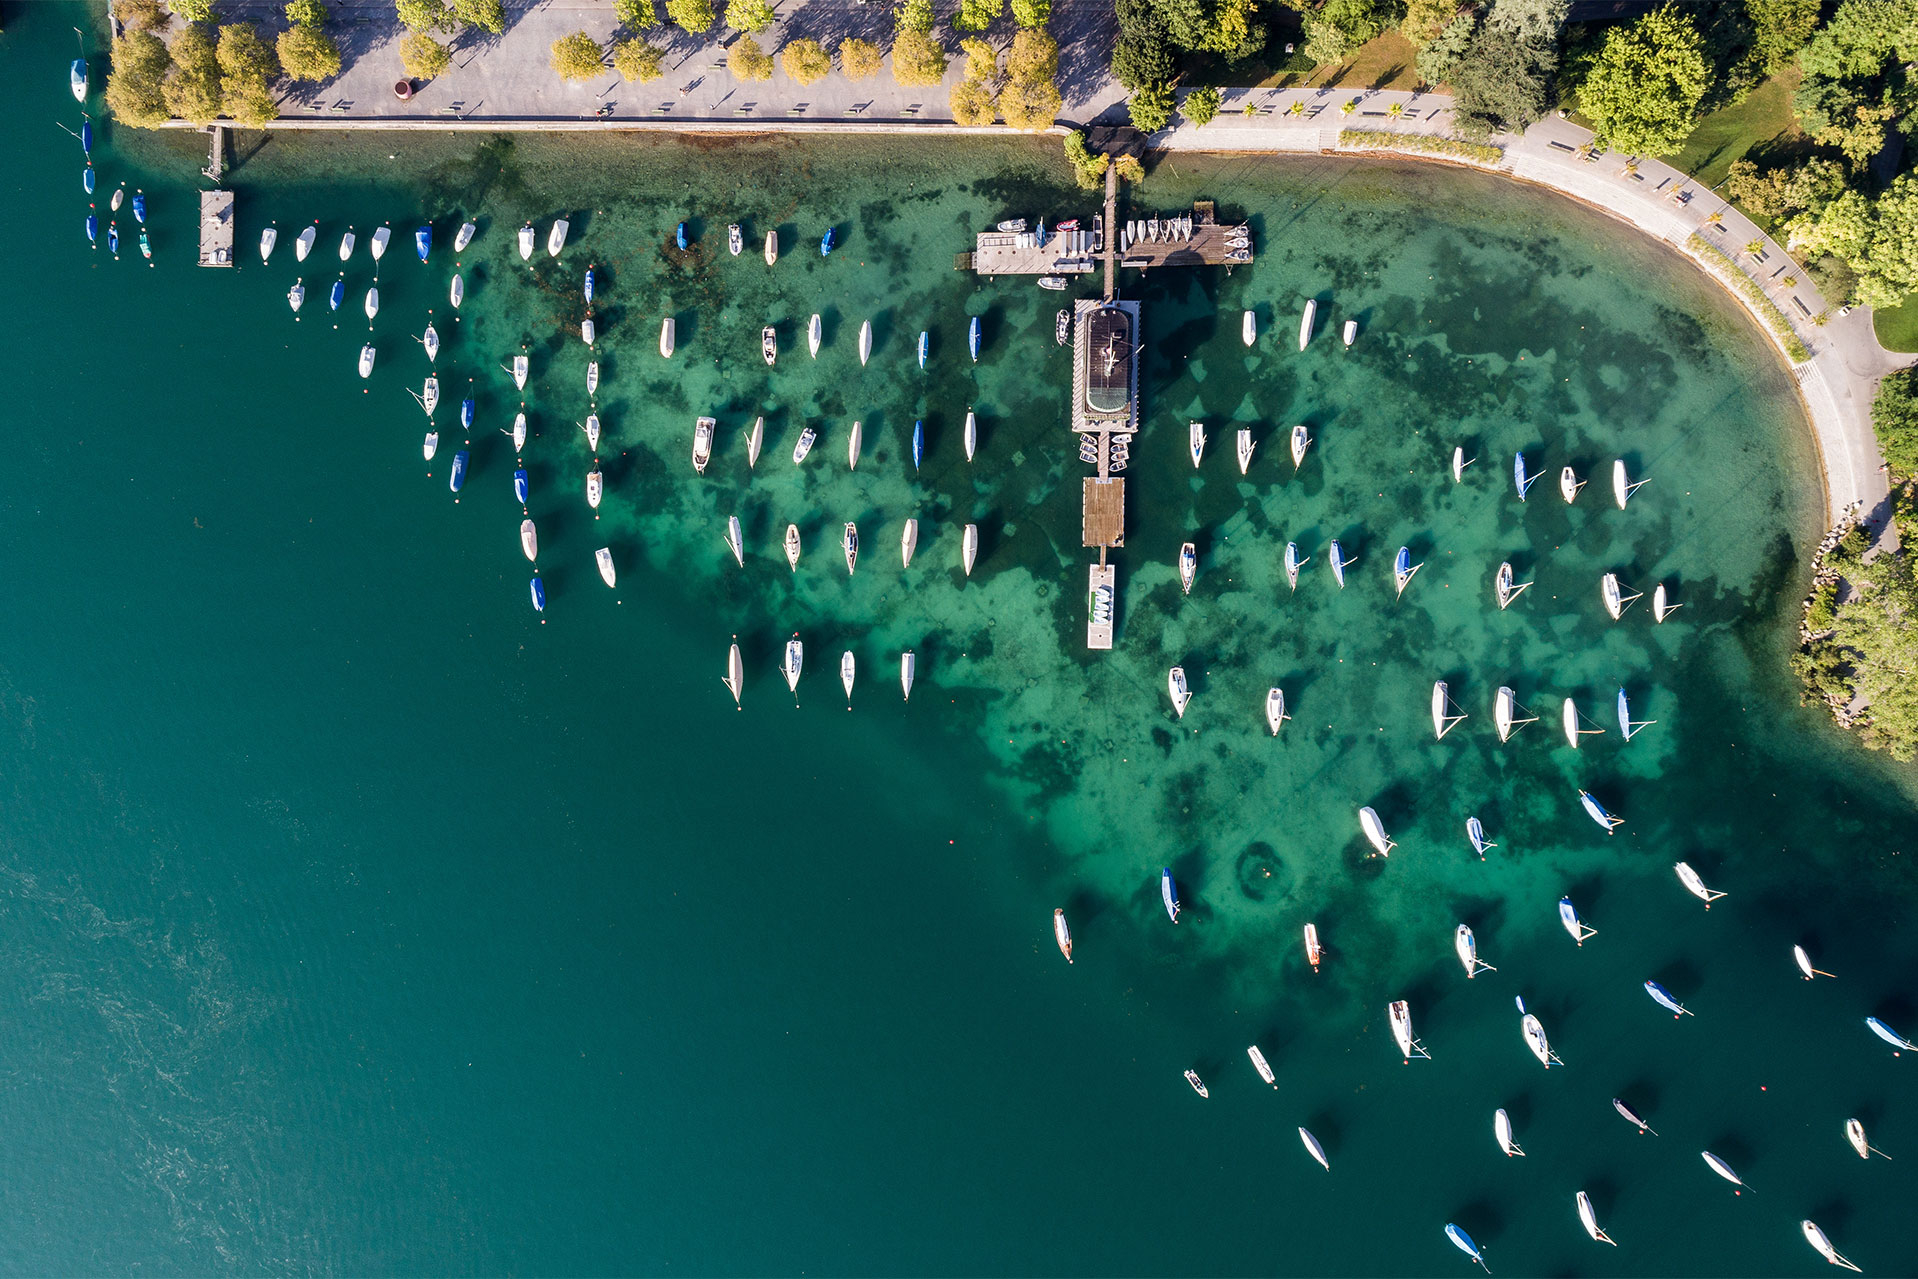 Aerial view of boats docked at a dock on a sunny day in Zurich.